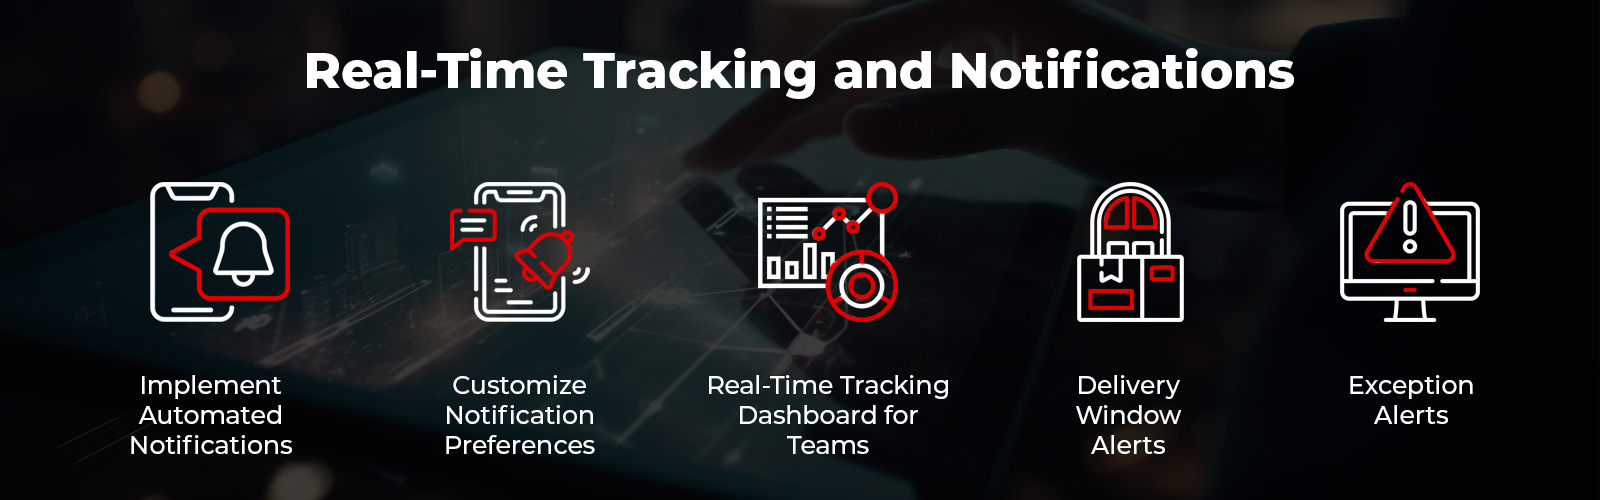 Real-time tracking and notifications in dispatch software